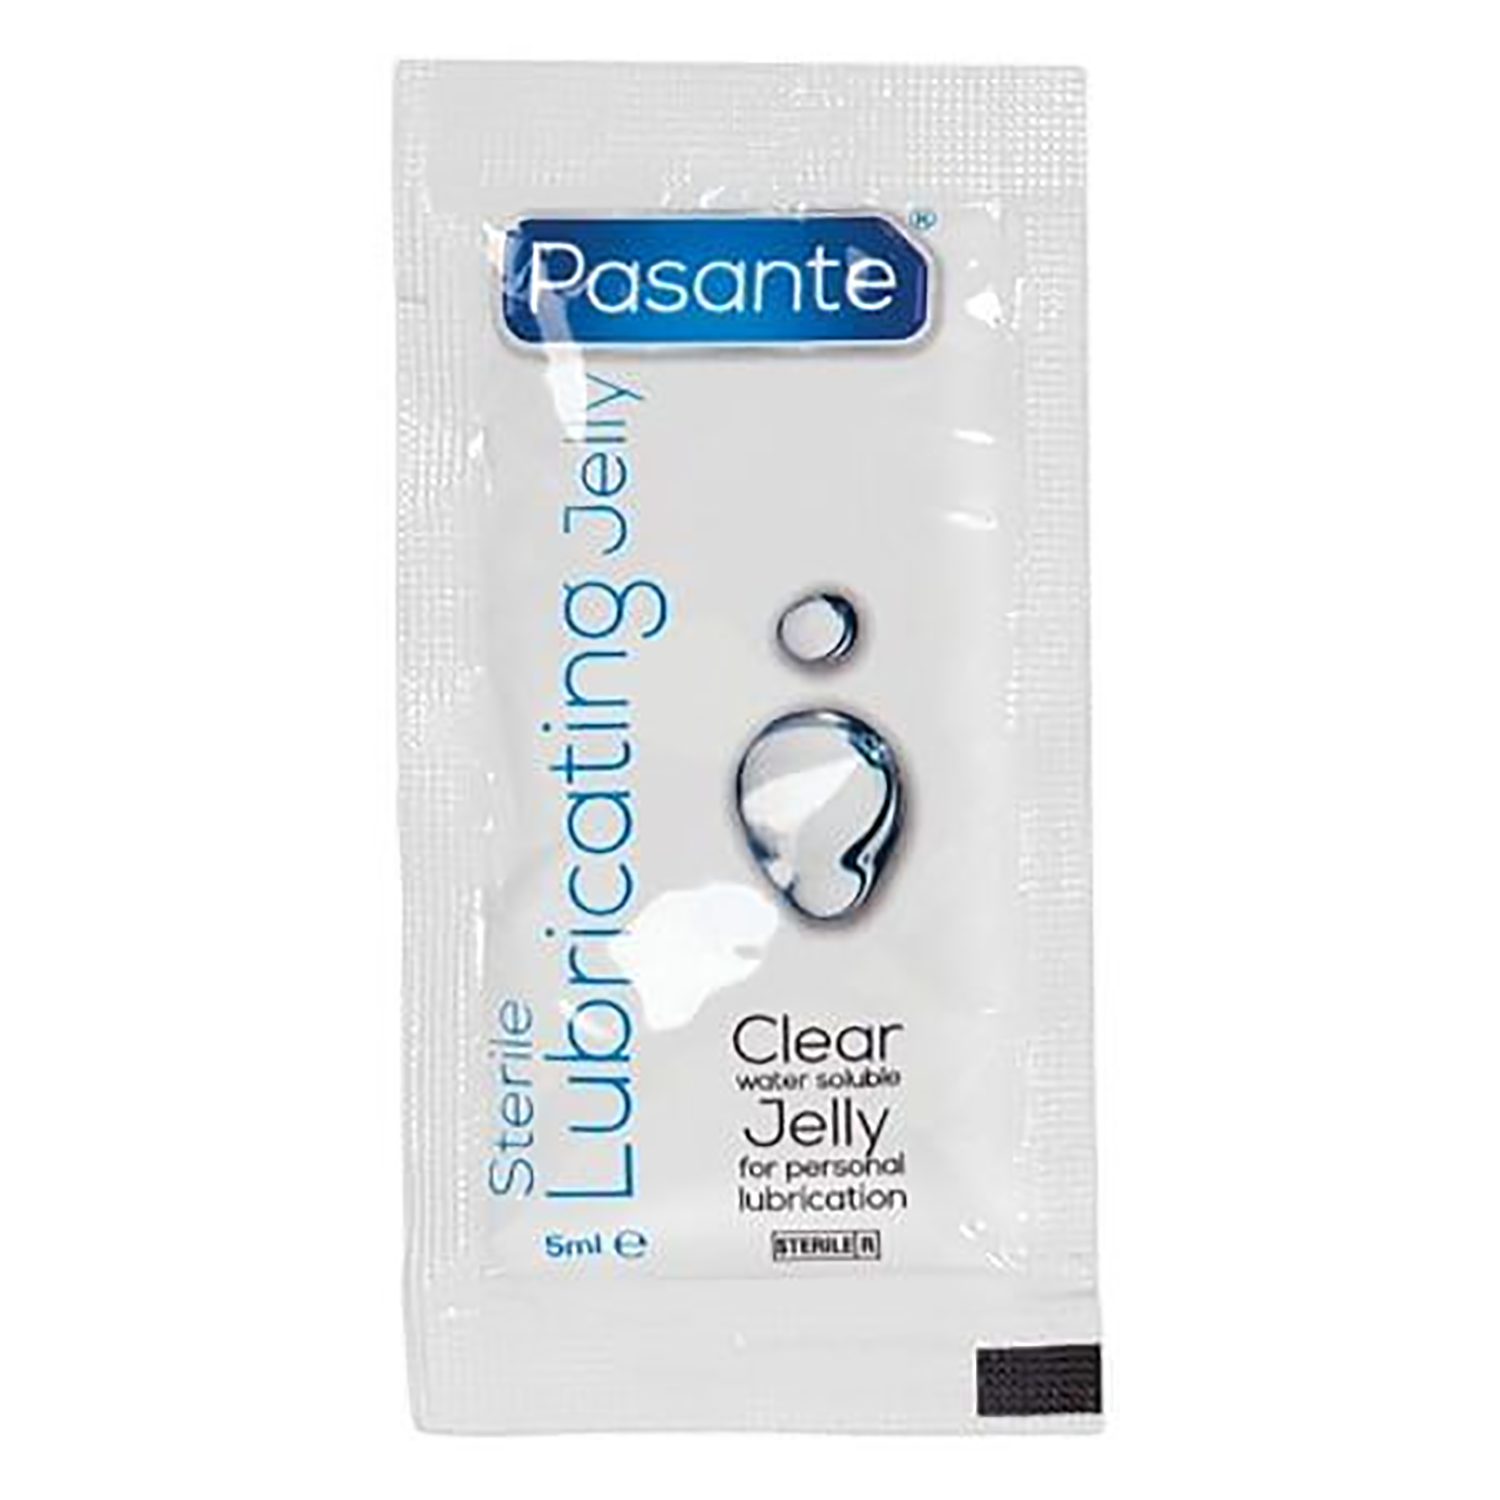 Pasante Lubricating Jelly  Sachets | Sterile | 5ml | Pack of 100